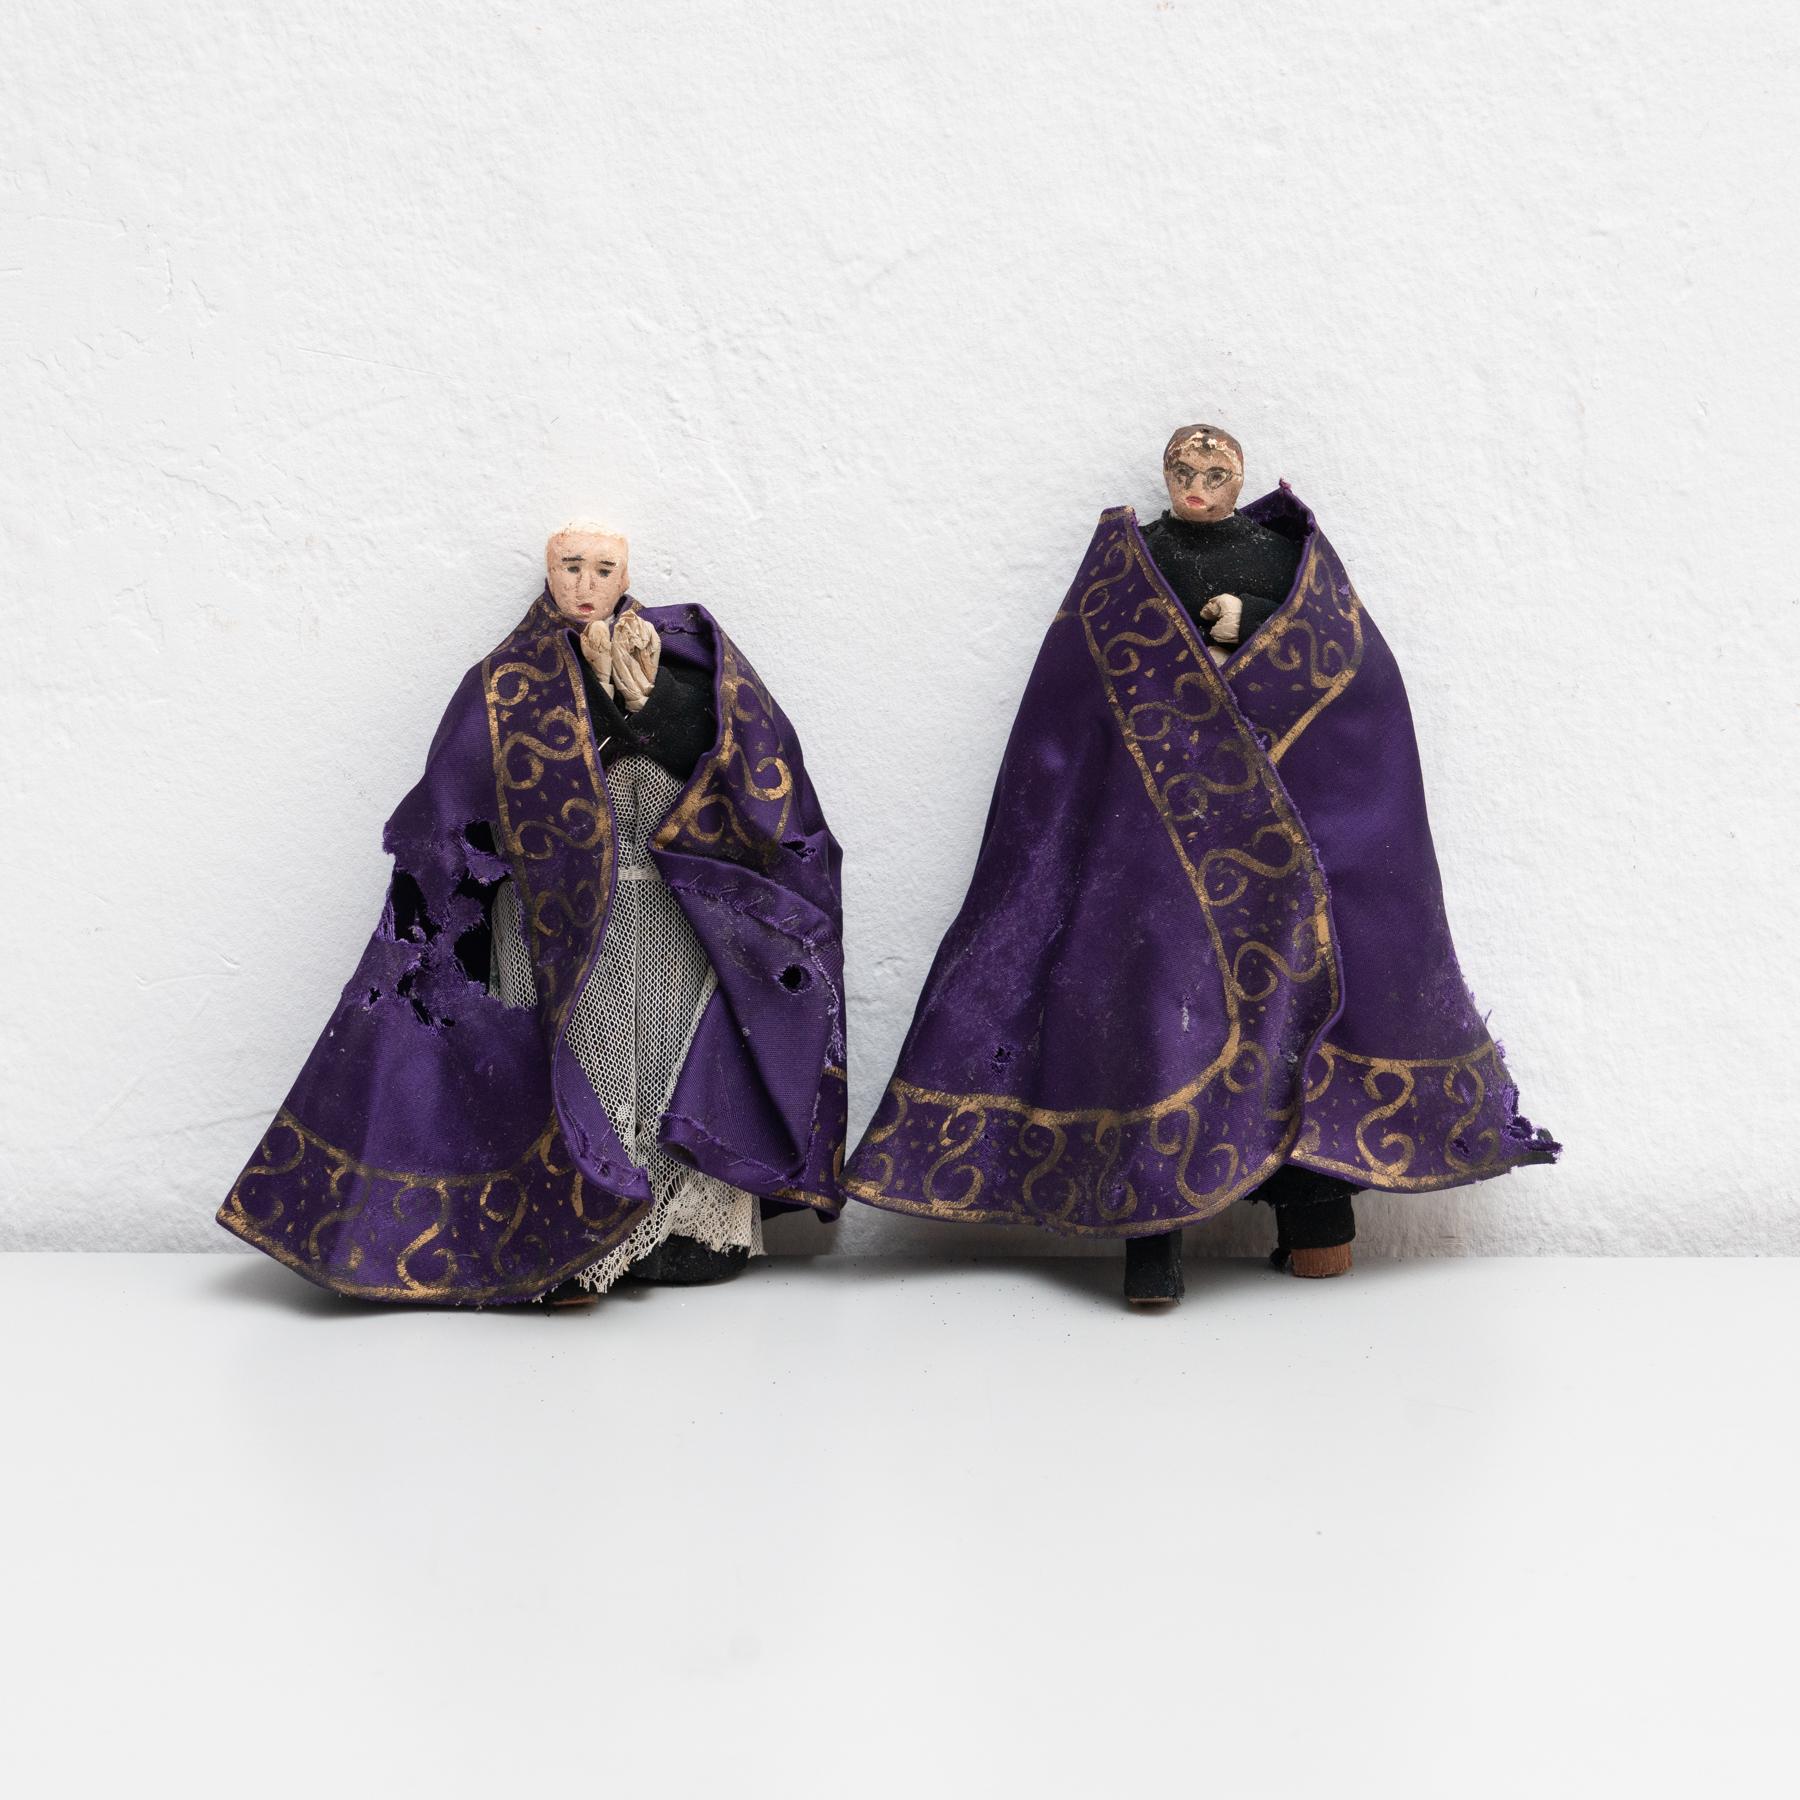 Antique early 20th century pair of hand painted rag dolls of two parish priests. 

Manufactured circa 1920 in Spain.

In original condition, with minor wear consistent with age and use, preserving a beautiful